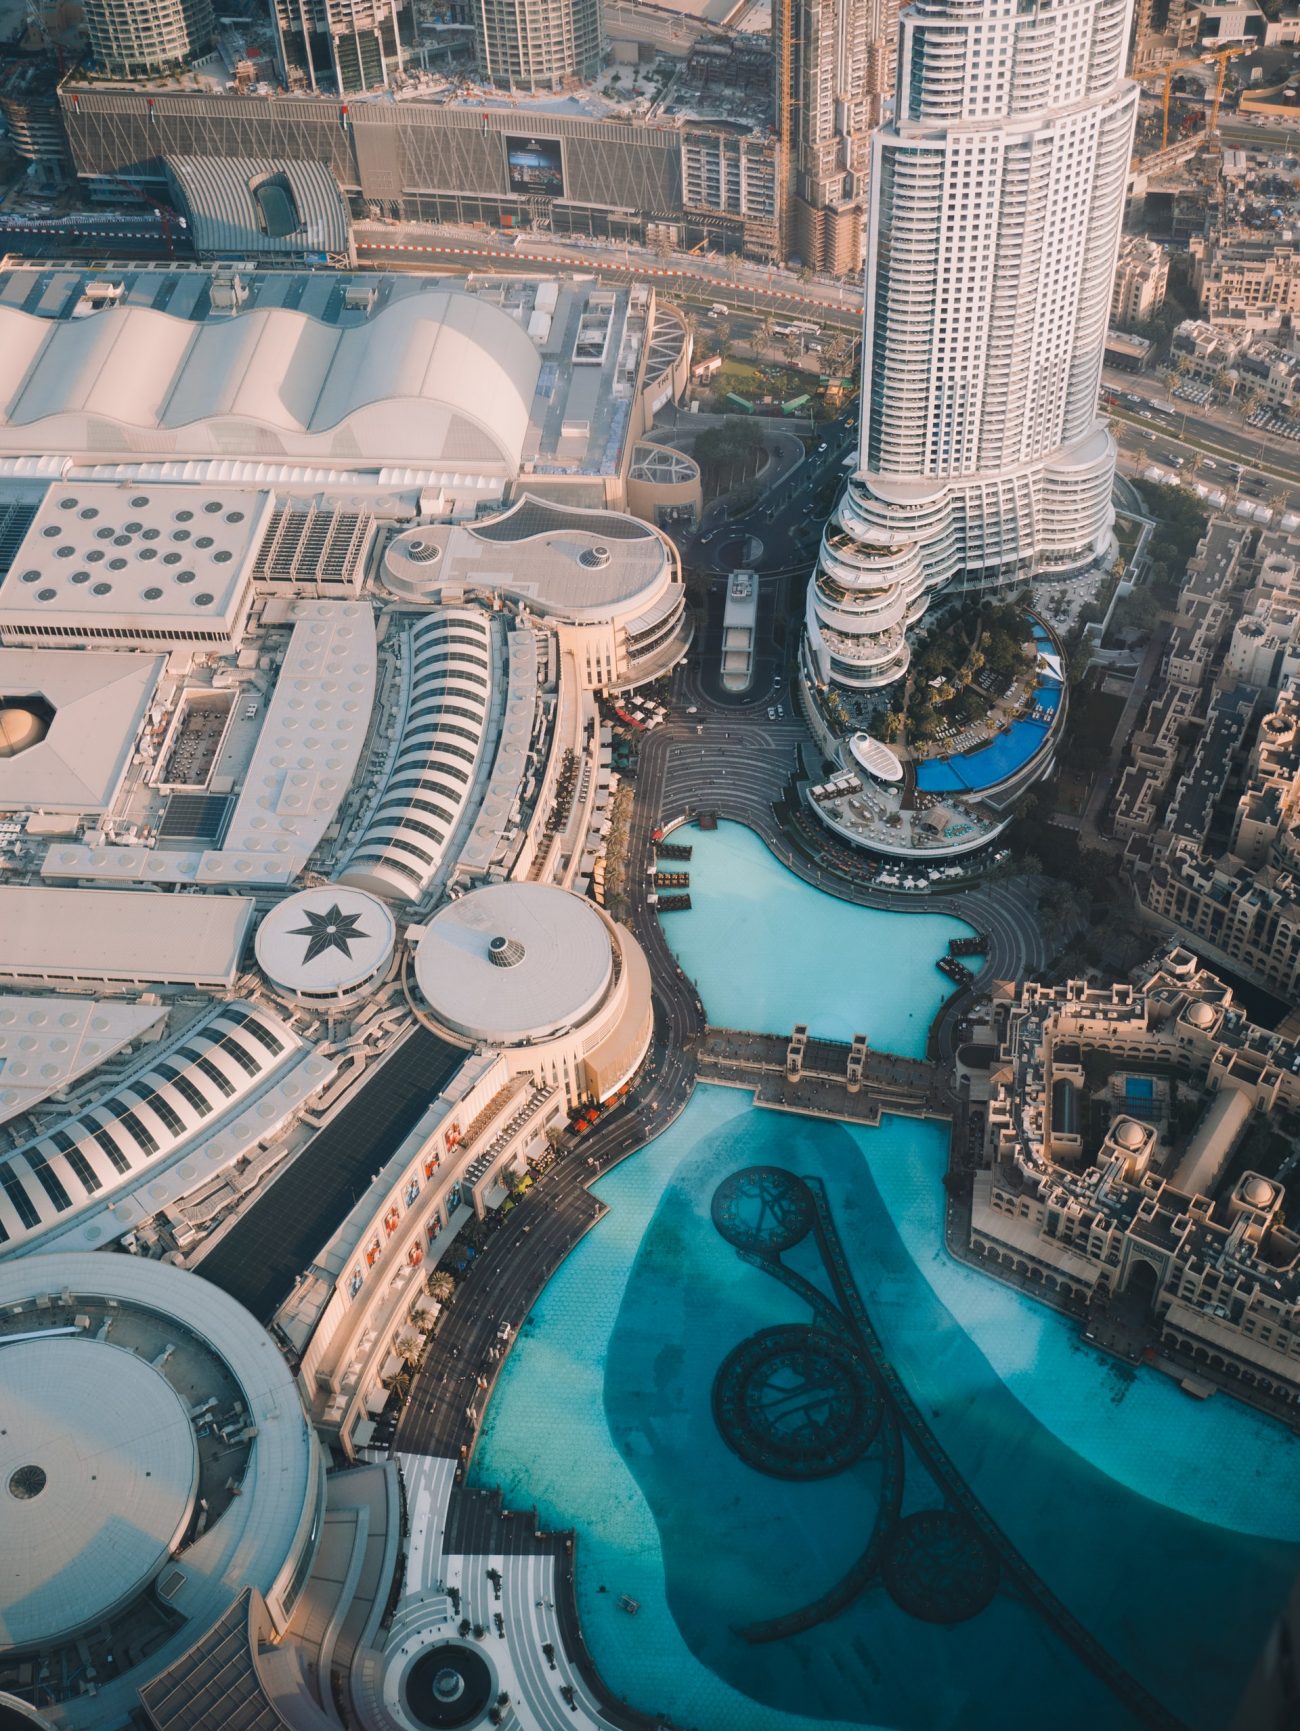 pat-whelen-CX3S069QPno-unsplash_With the pandemic related restrictions beginning to ease down, Dubai's non-oil private sector economy proves its mettle with a better expansion